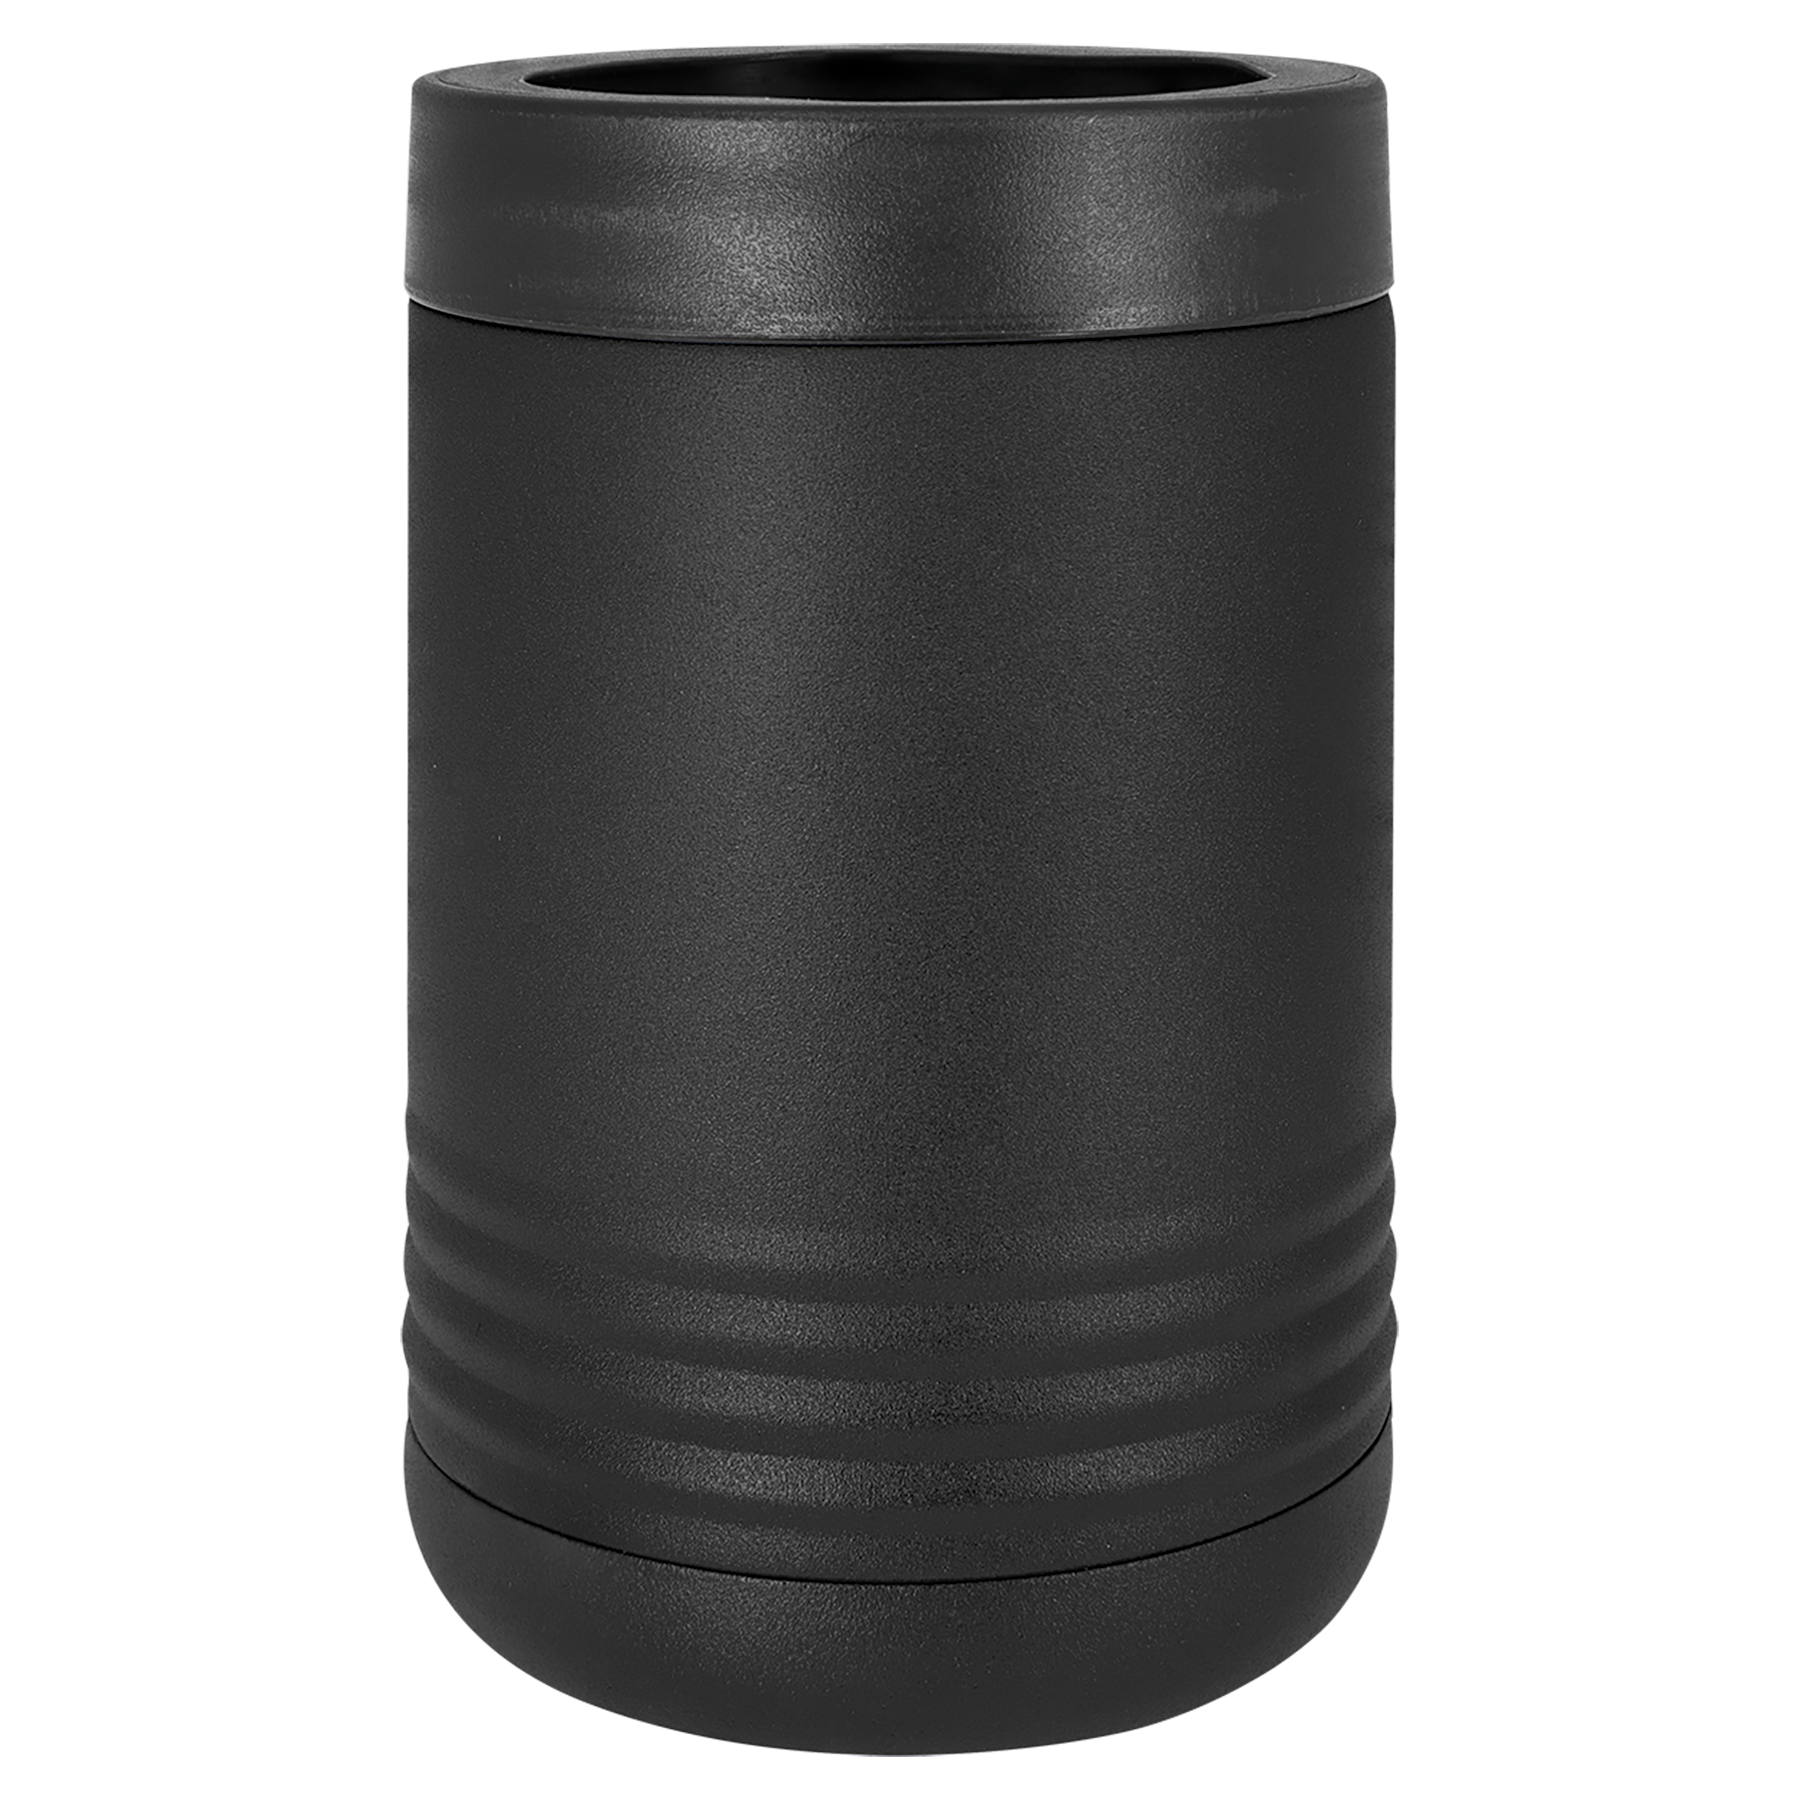 Black Beverage Holder-One Free Engraving   -Double-wall Vacuum Insulated  -Made from 18/8 Gauge Stainless Steel (Type 304 Food Grade)  -Fits most 12oz  and 16oz Cans and 12oz Bottles  -Not recommended for Dishwasher  -Works with Cold and Hot Drinks  -18 Color Options  -Perfect for Personalized Gifts, Awards, Incentives, Swag & Fundraisers